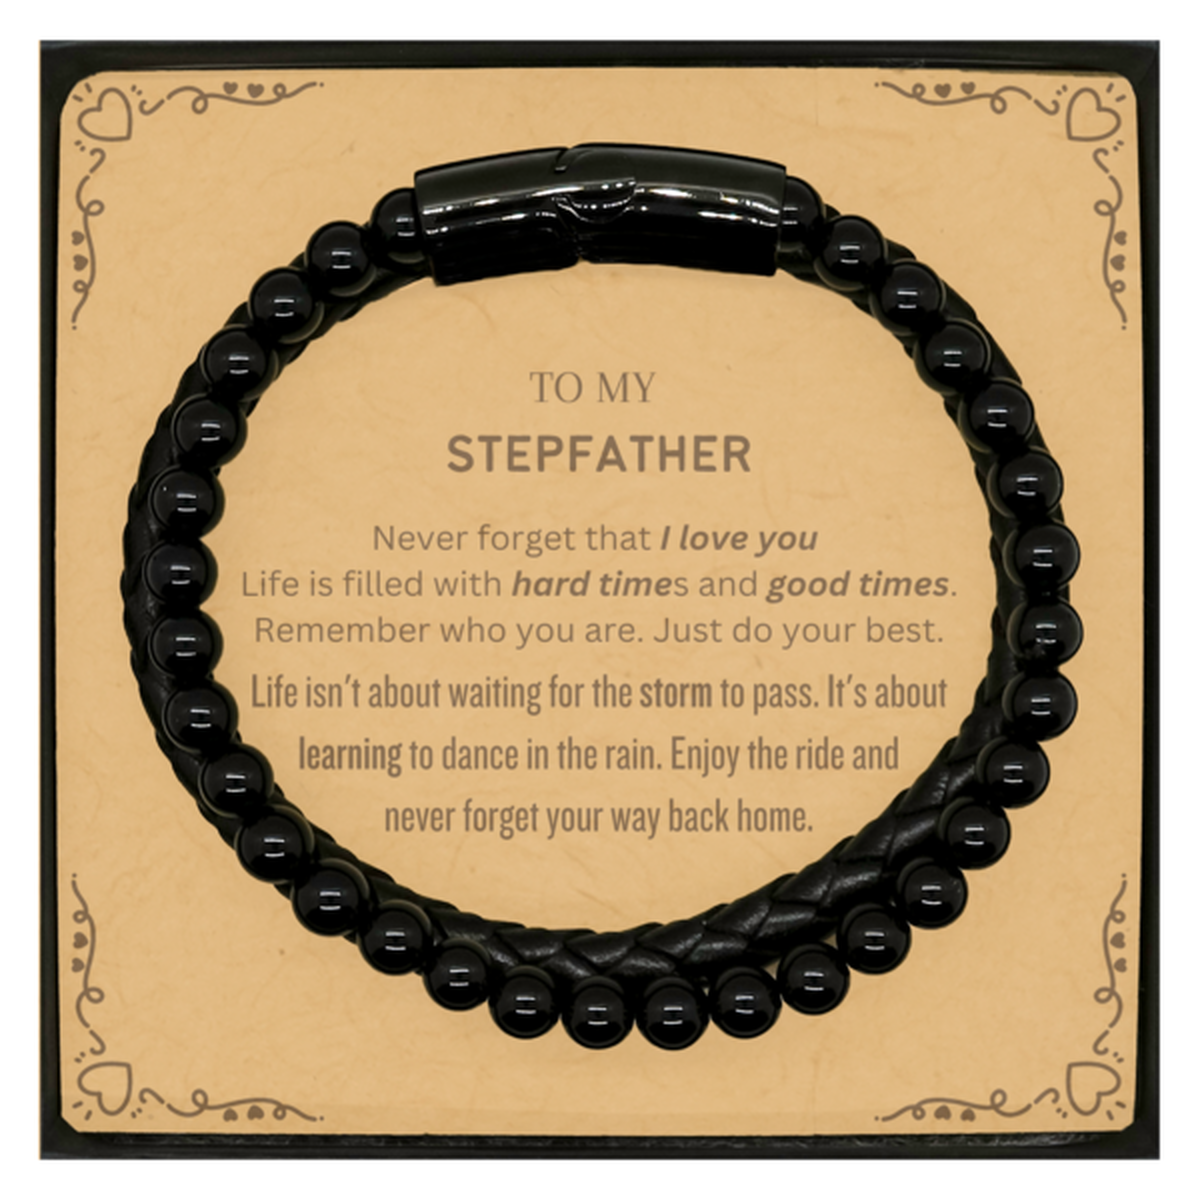 Christmas Stepfather Stone Leather Bracelets Gifts, To My Stepfather Birthday Thank You Gifts For Stepfather, Graduation Unique Gifts For Stepfather To My Stepfather Never forget that I love you life is filled with hard times and good times. Remember who